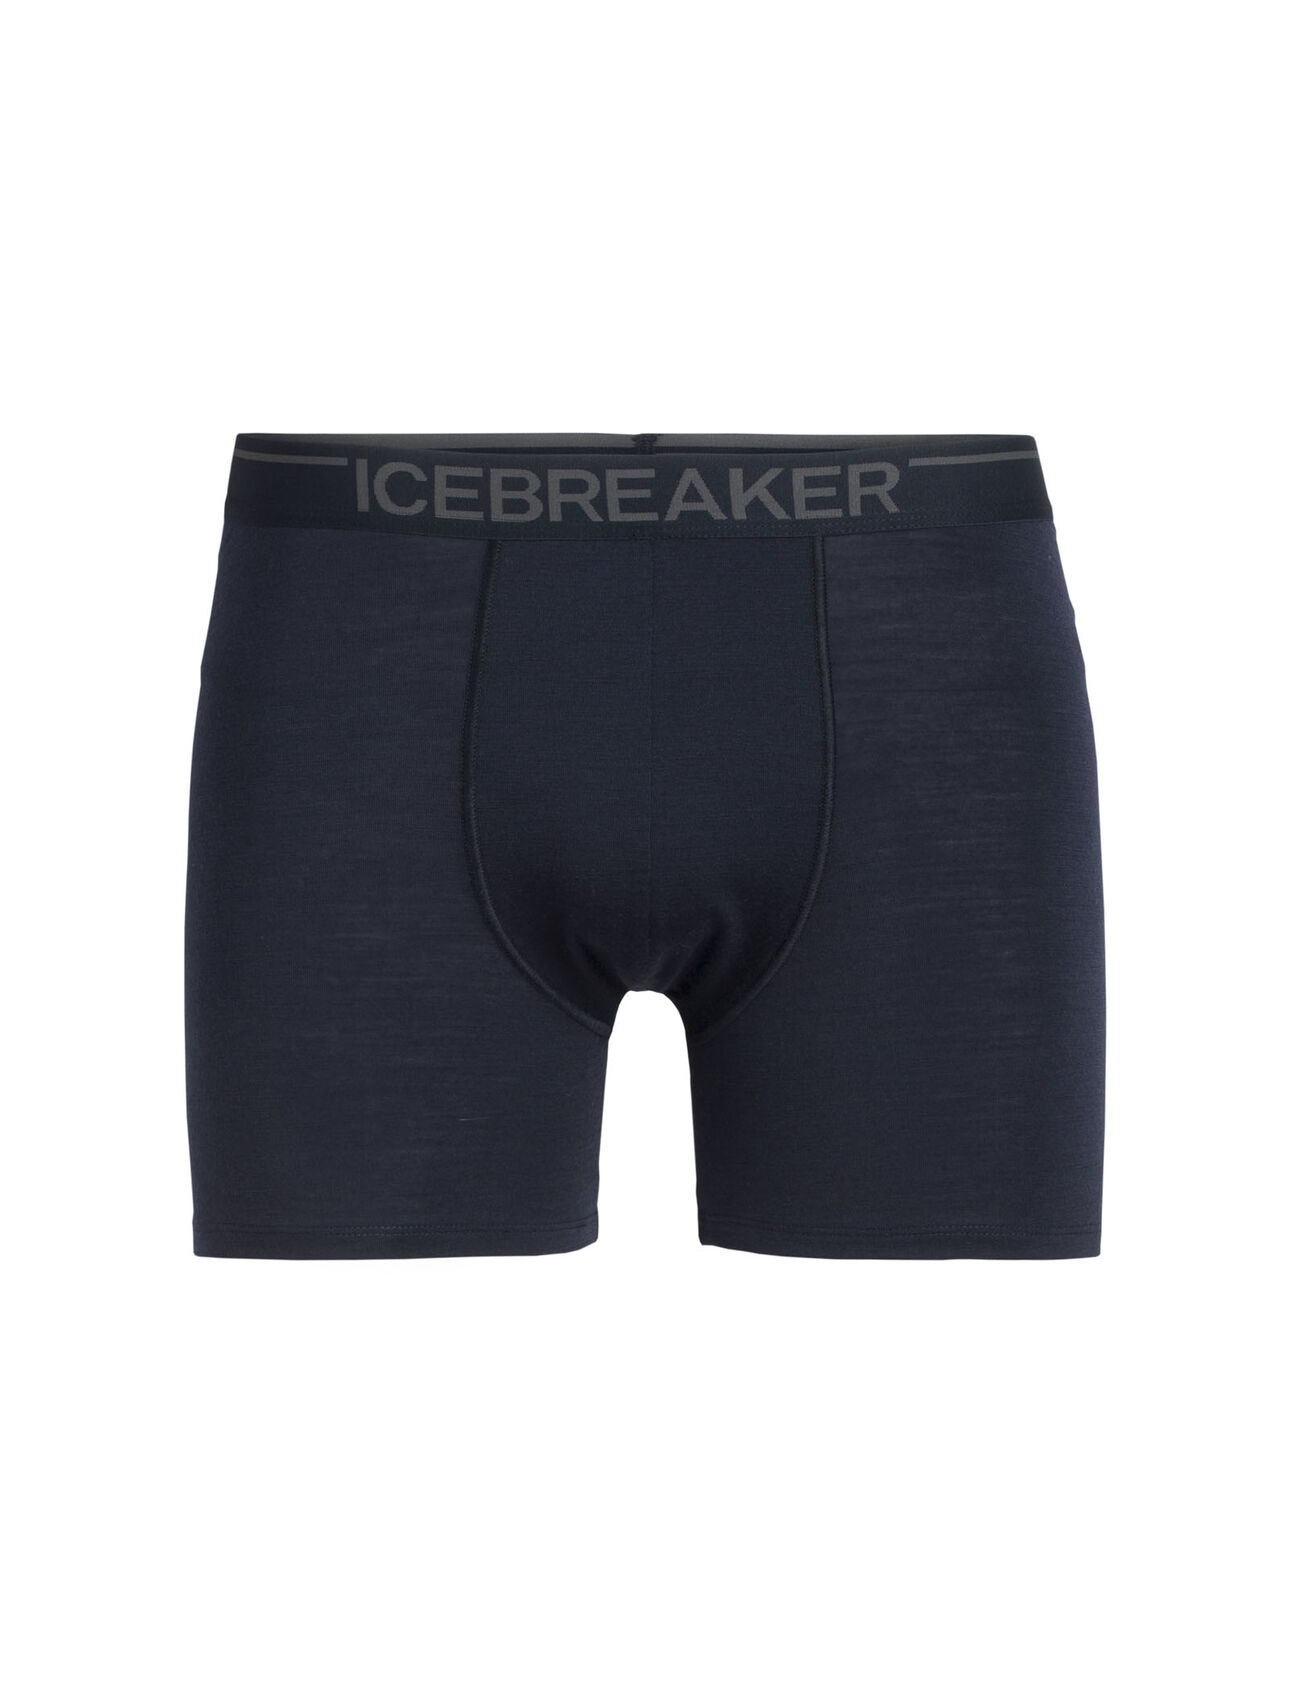 Icebreaker Mens Anatomica Long Boxers, Midnight Navy/Prussian Blue-0